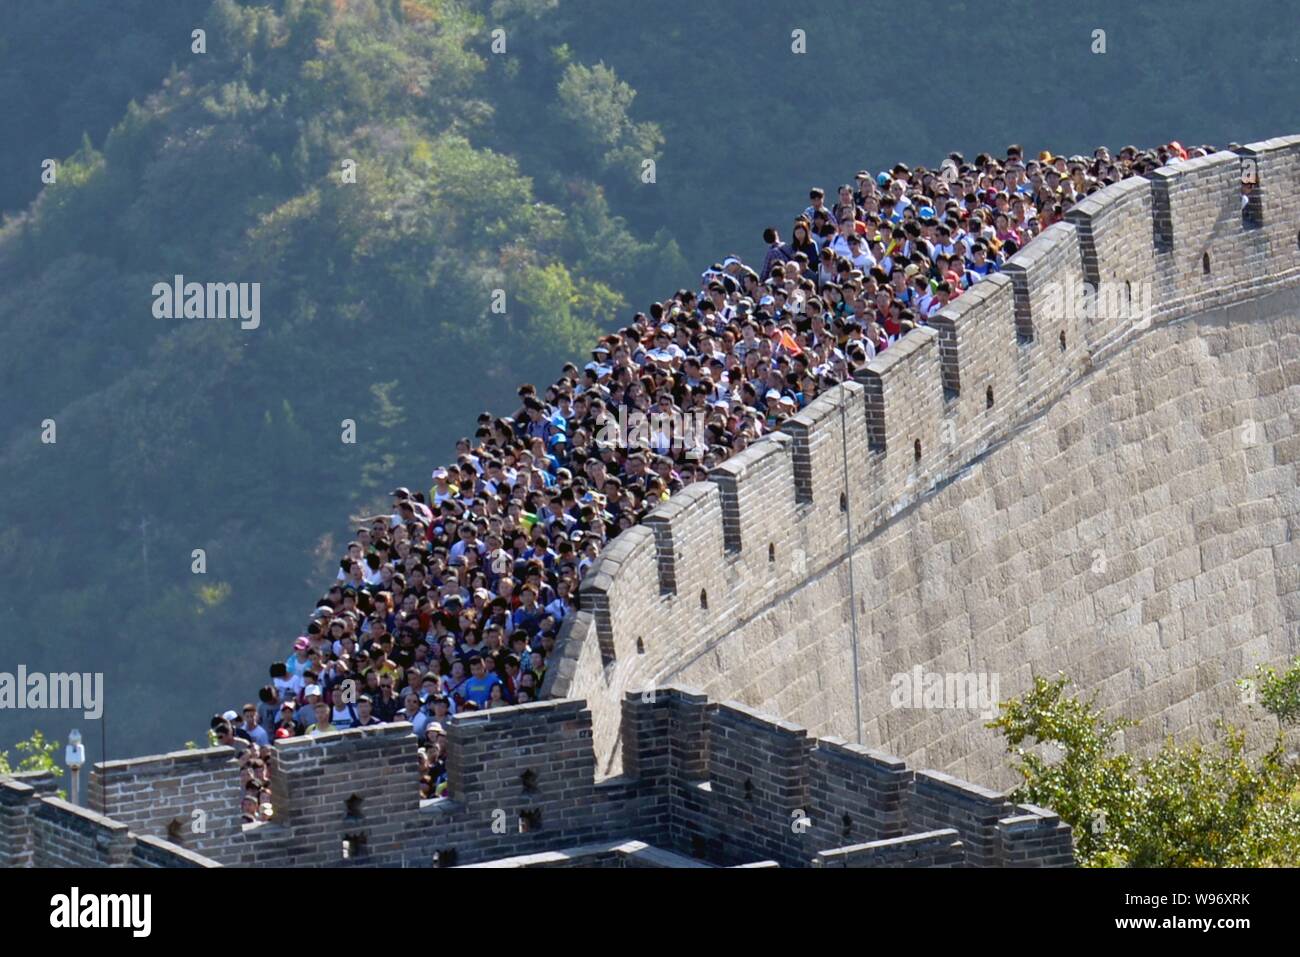 tourists-crowd-the-badaling-great-wall-d